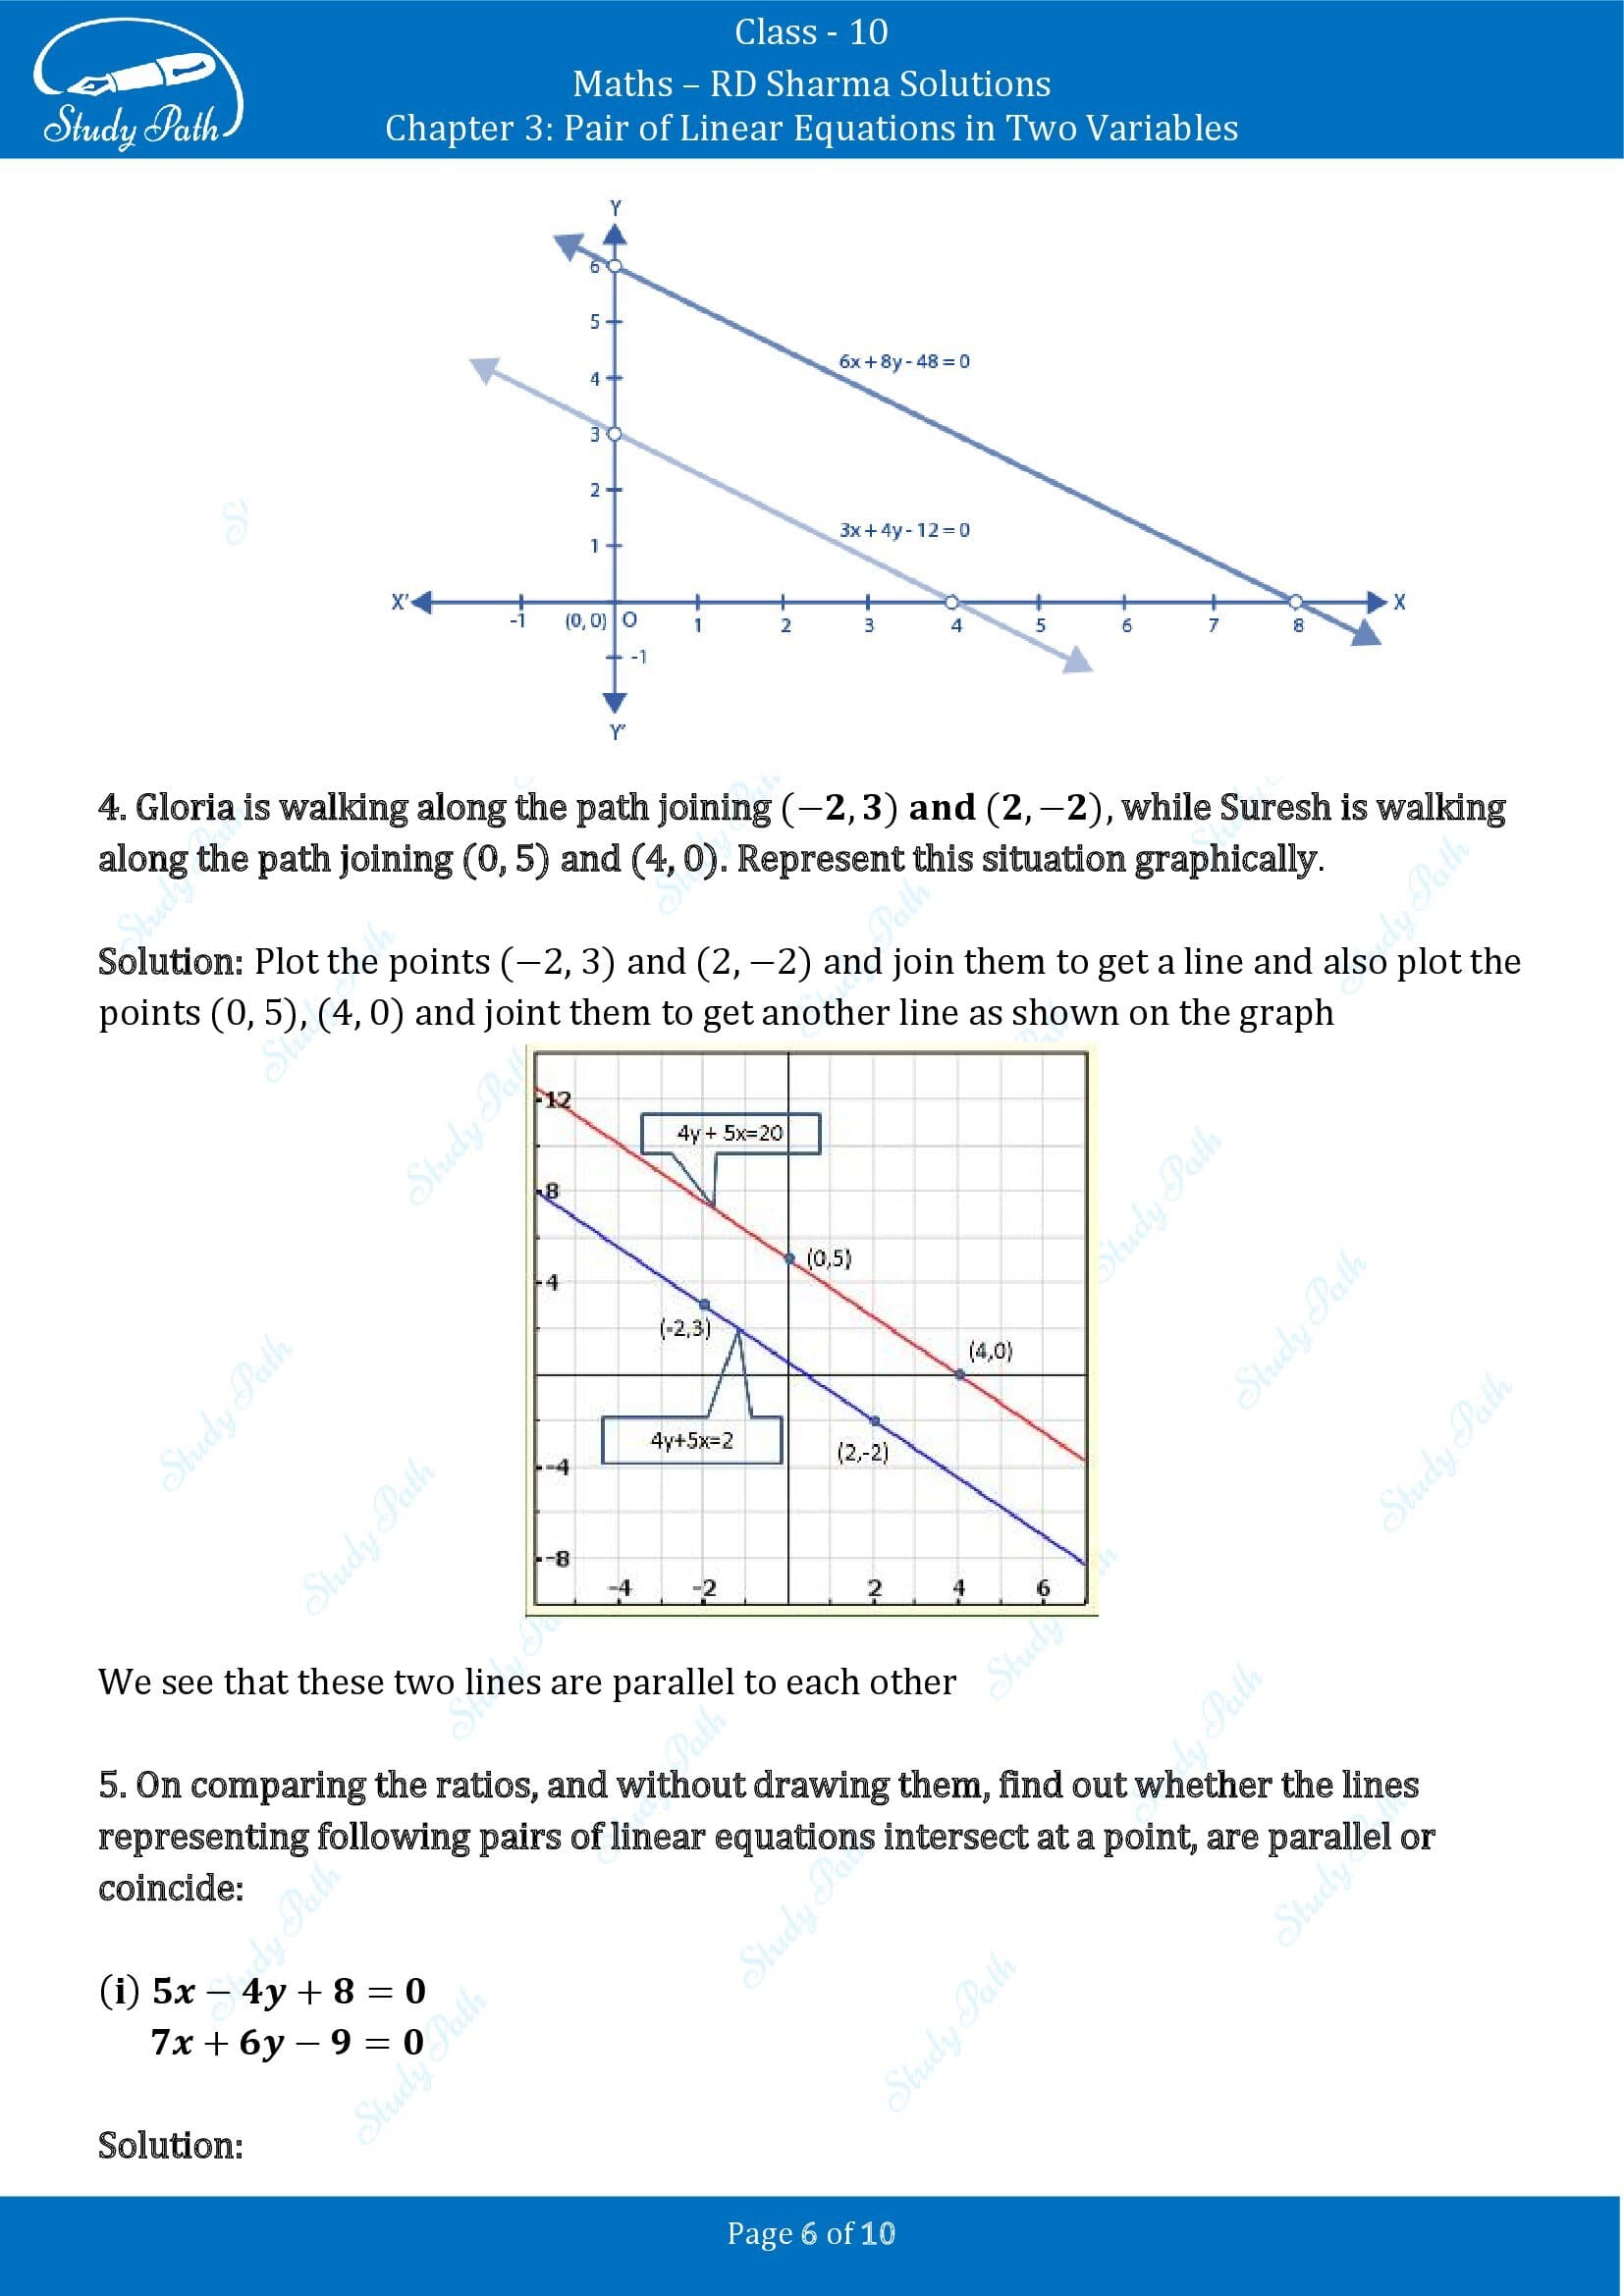 RD Sharma Solutions Class 10 Chapter 3 Pair of Linear Equations in Two Variables Exercise 3.1 00006